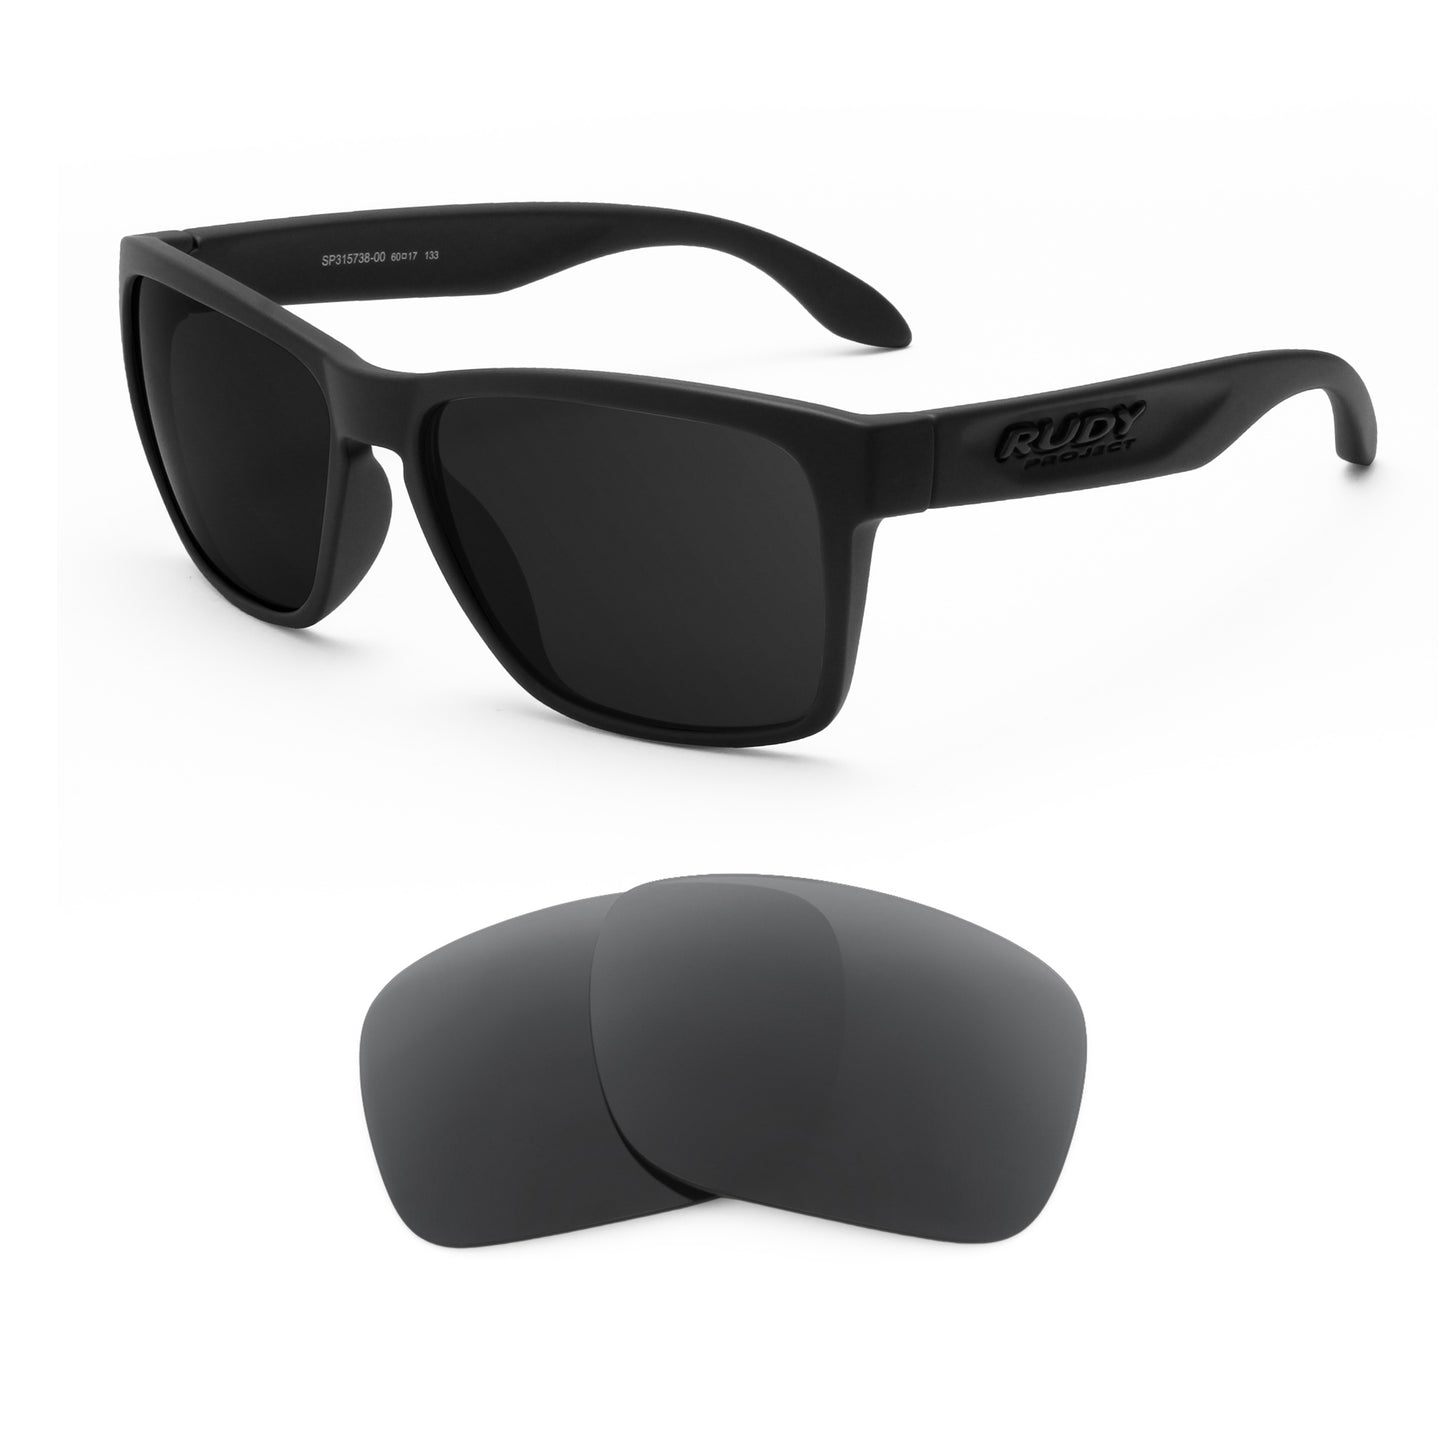 Rudy Project Spinhawk sunglasses with replacement lenses